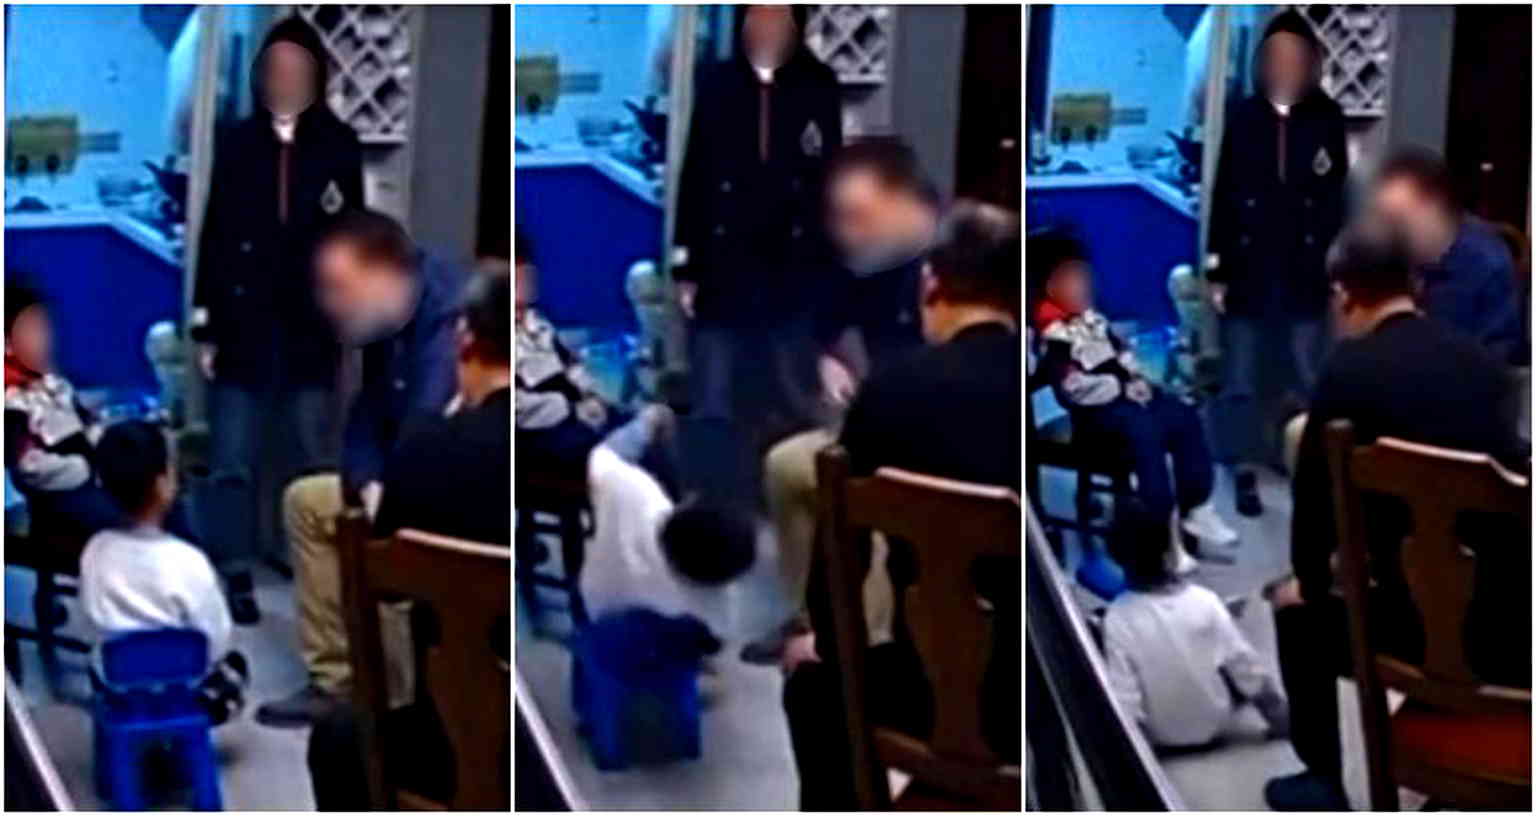 Viral video captures moment 5-year-old is slapped out of his chair by classmate’s father in China